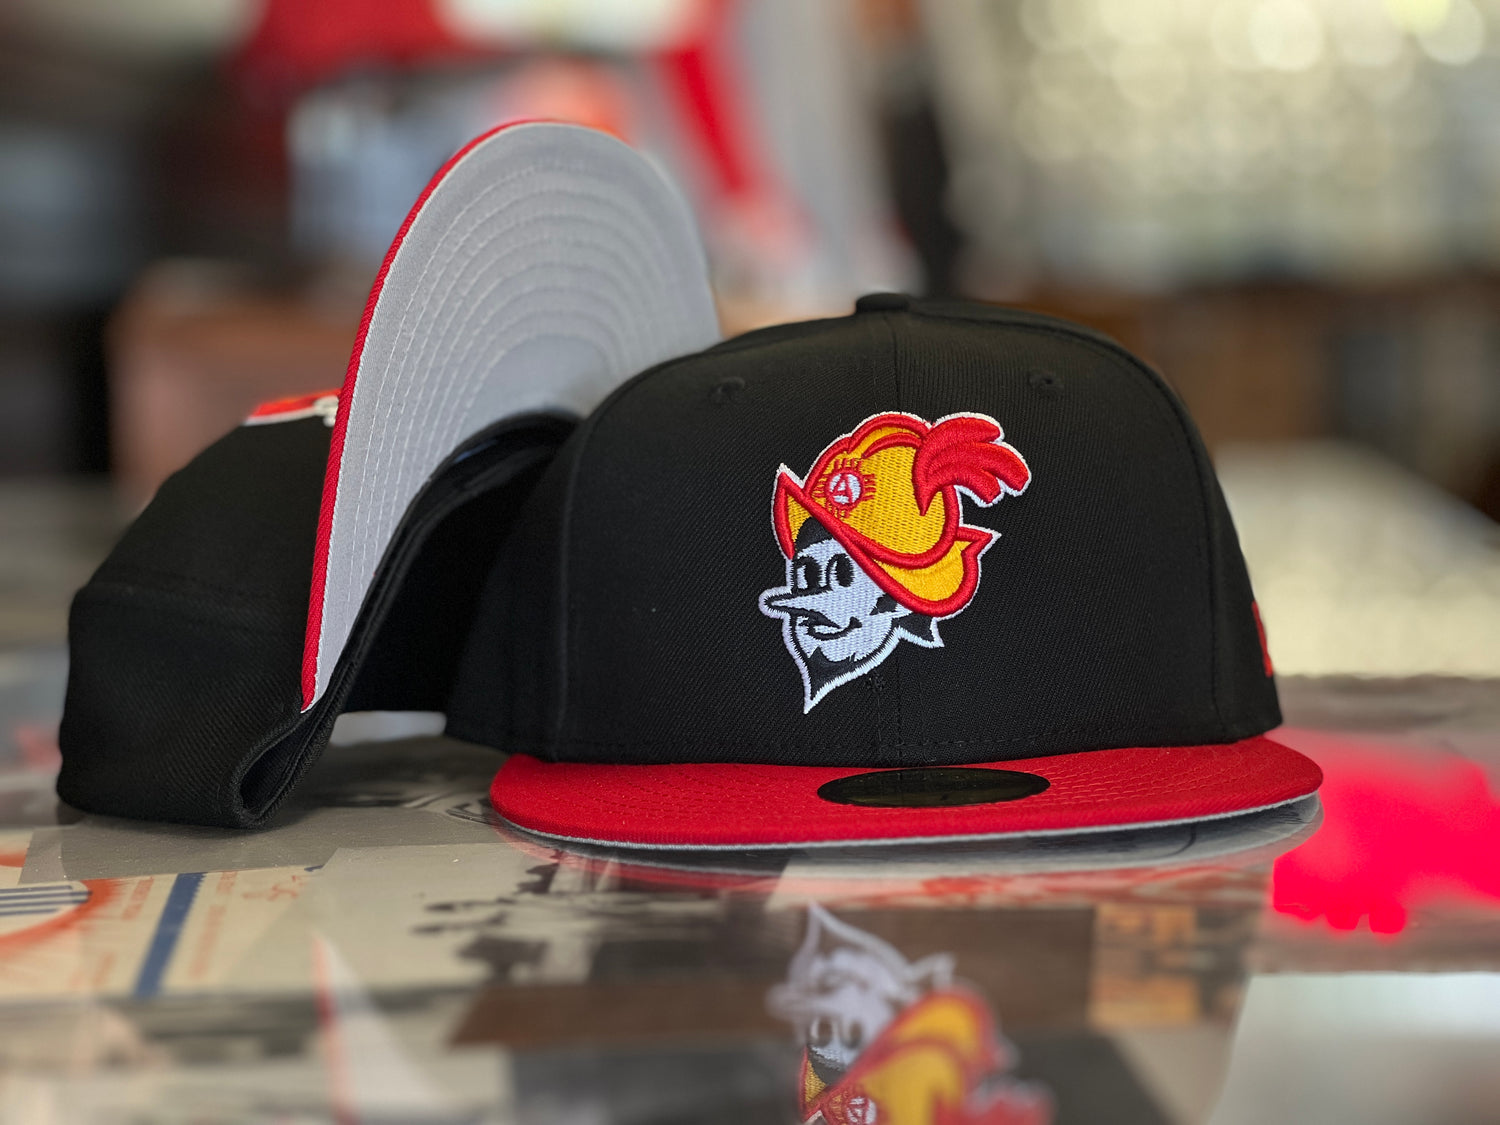 Fitted Hats – ABQ Dukes